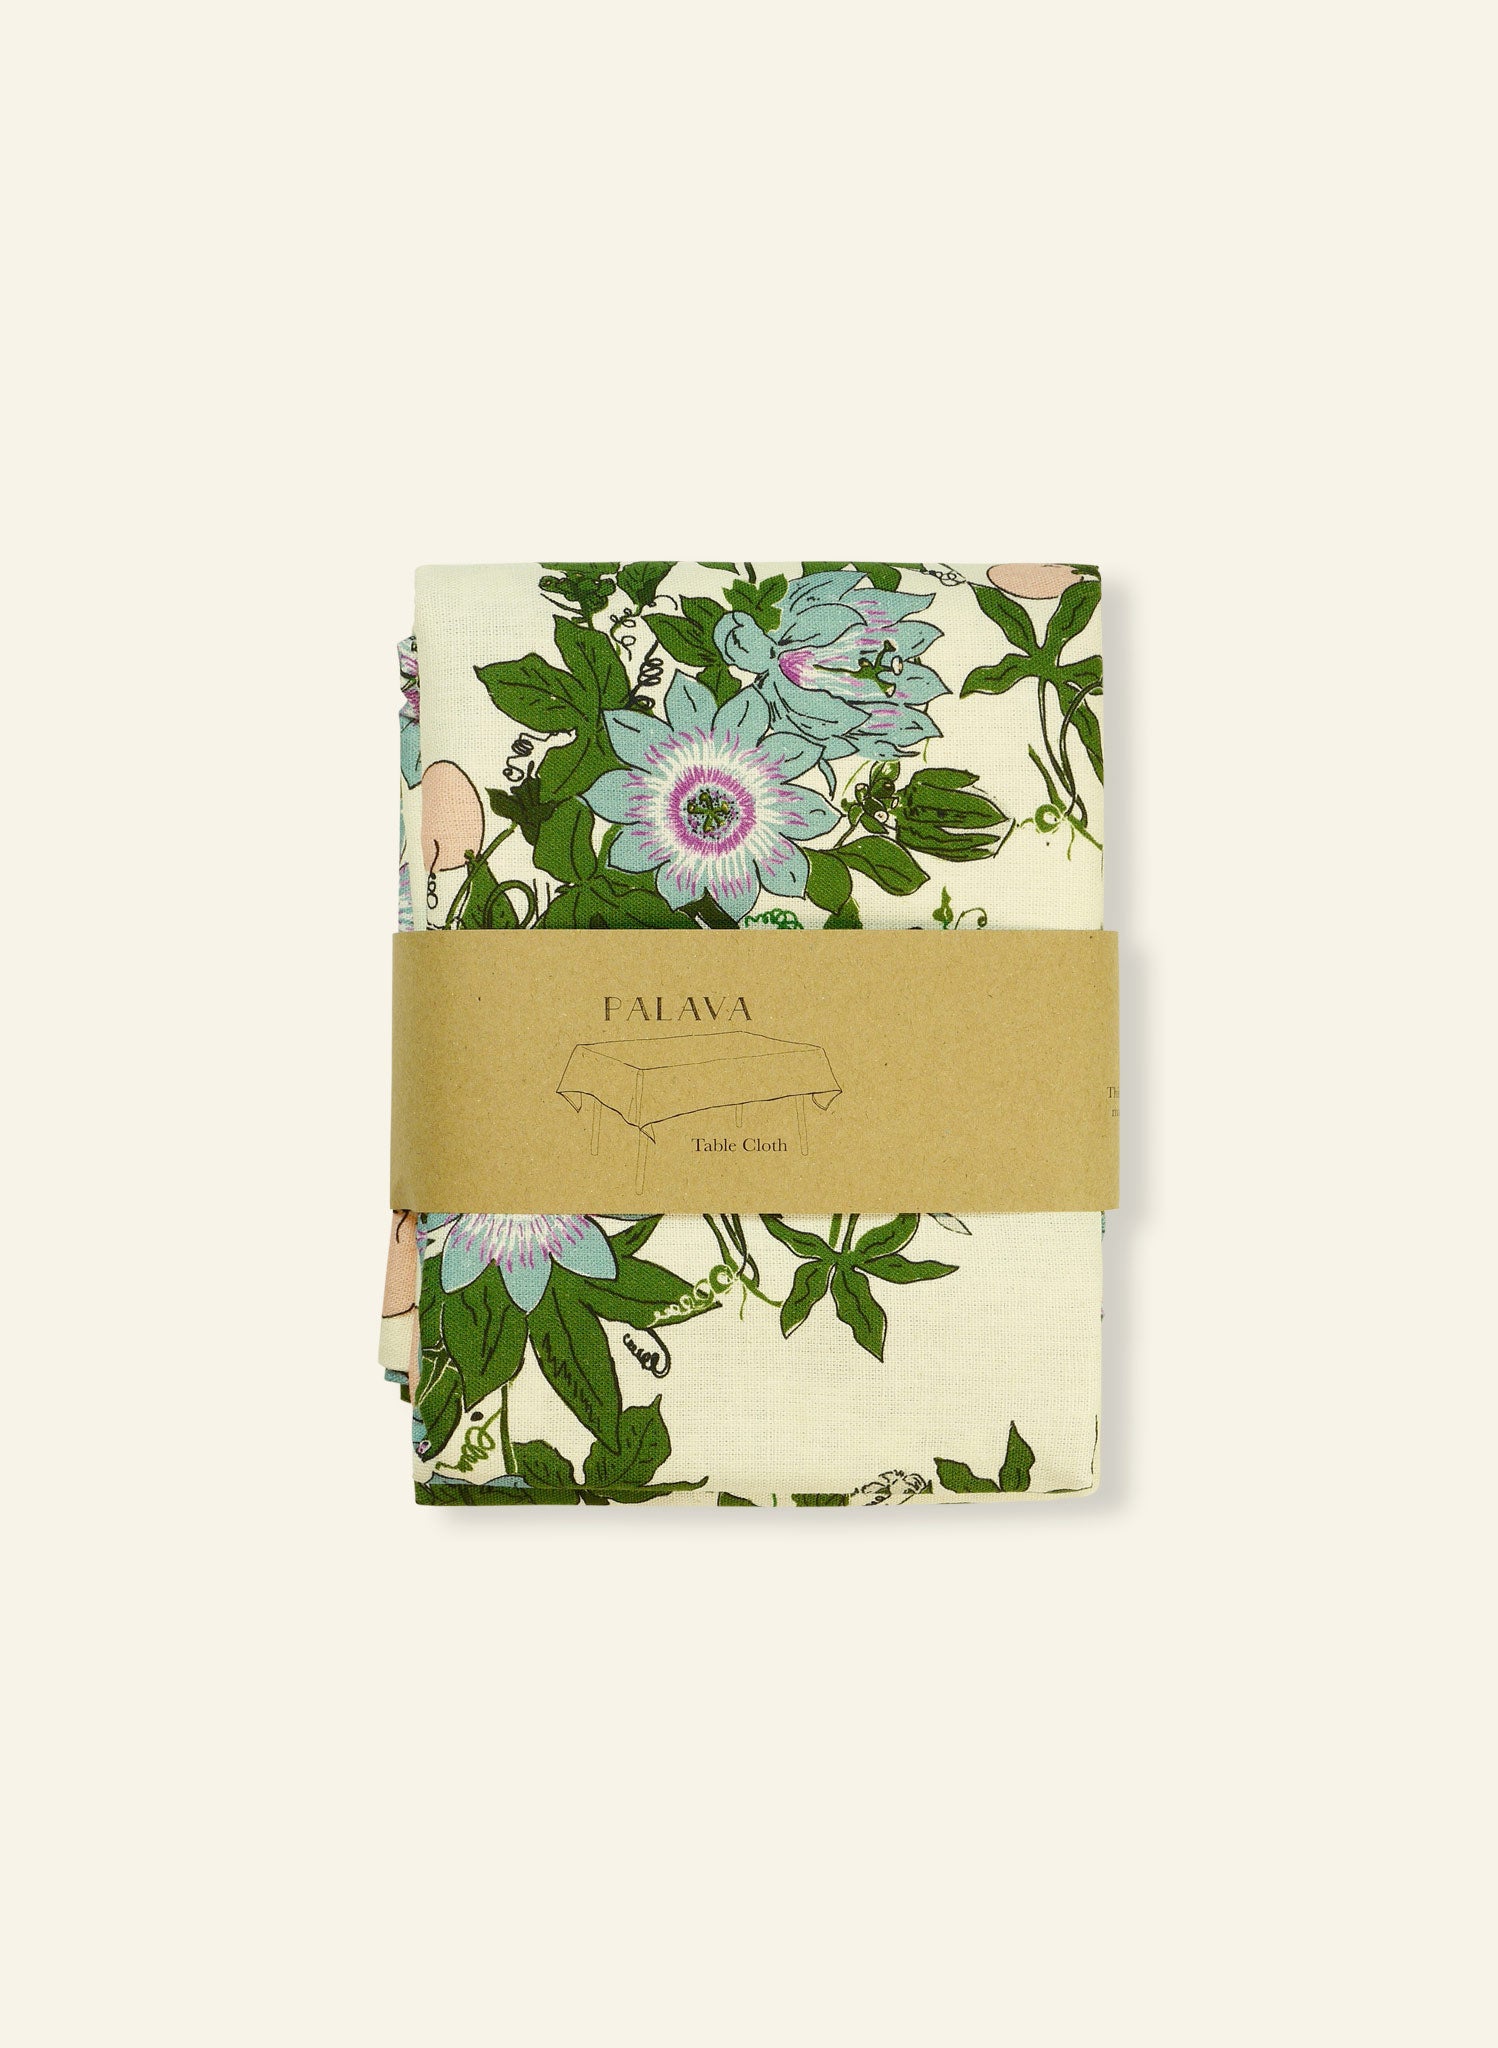 Table Cloth - Ivory Passionflower